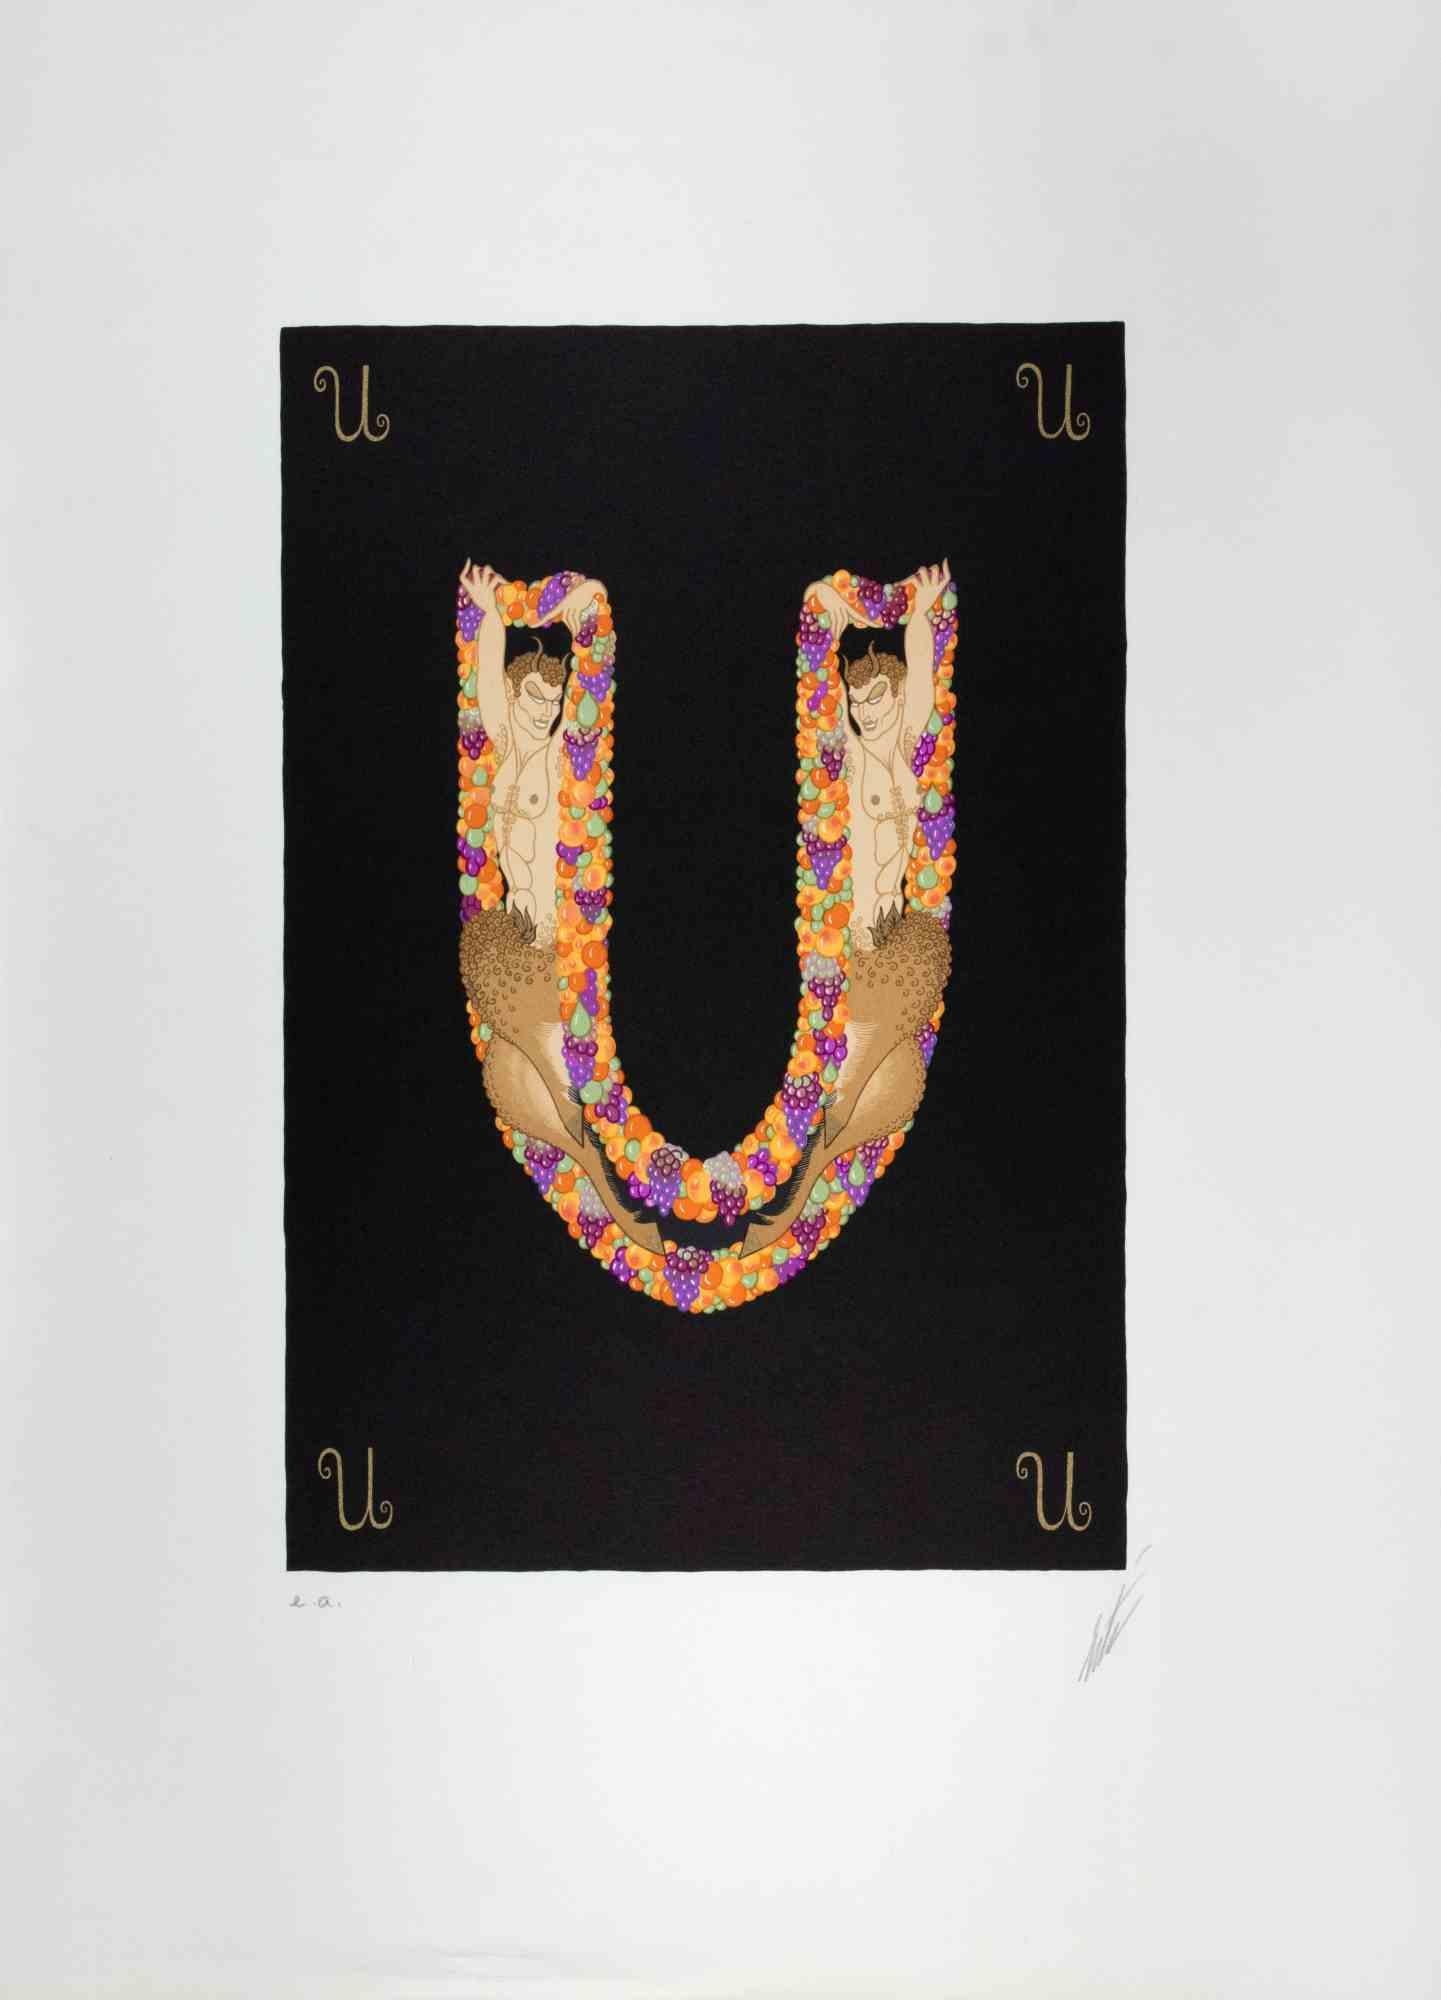 Letter U - from the suite Letters of the Alphabet is a contemporary artwork realized by Erté (Romain de Tirtoff).

Lithograph and Screen Print.

The artwork is from the suite "Letters of the Alphabet", 1976.

Hand signed on the lower margin. Artist